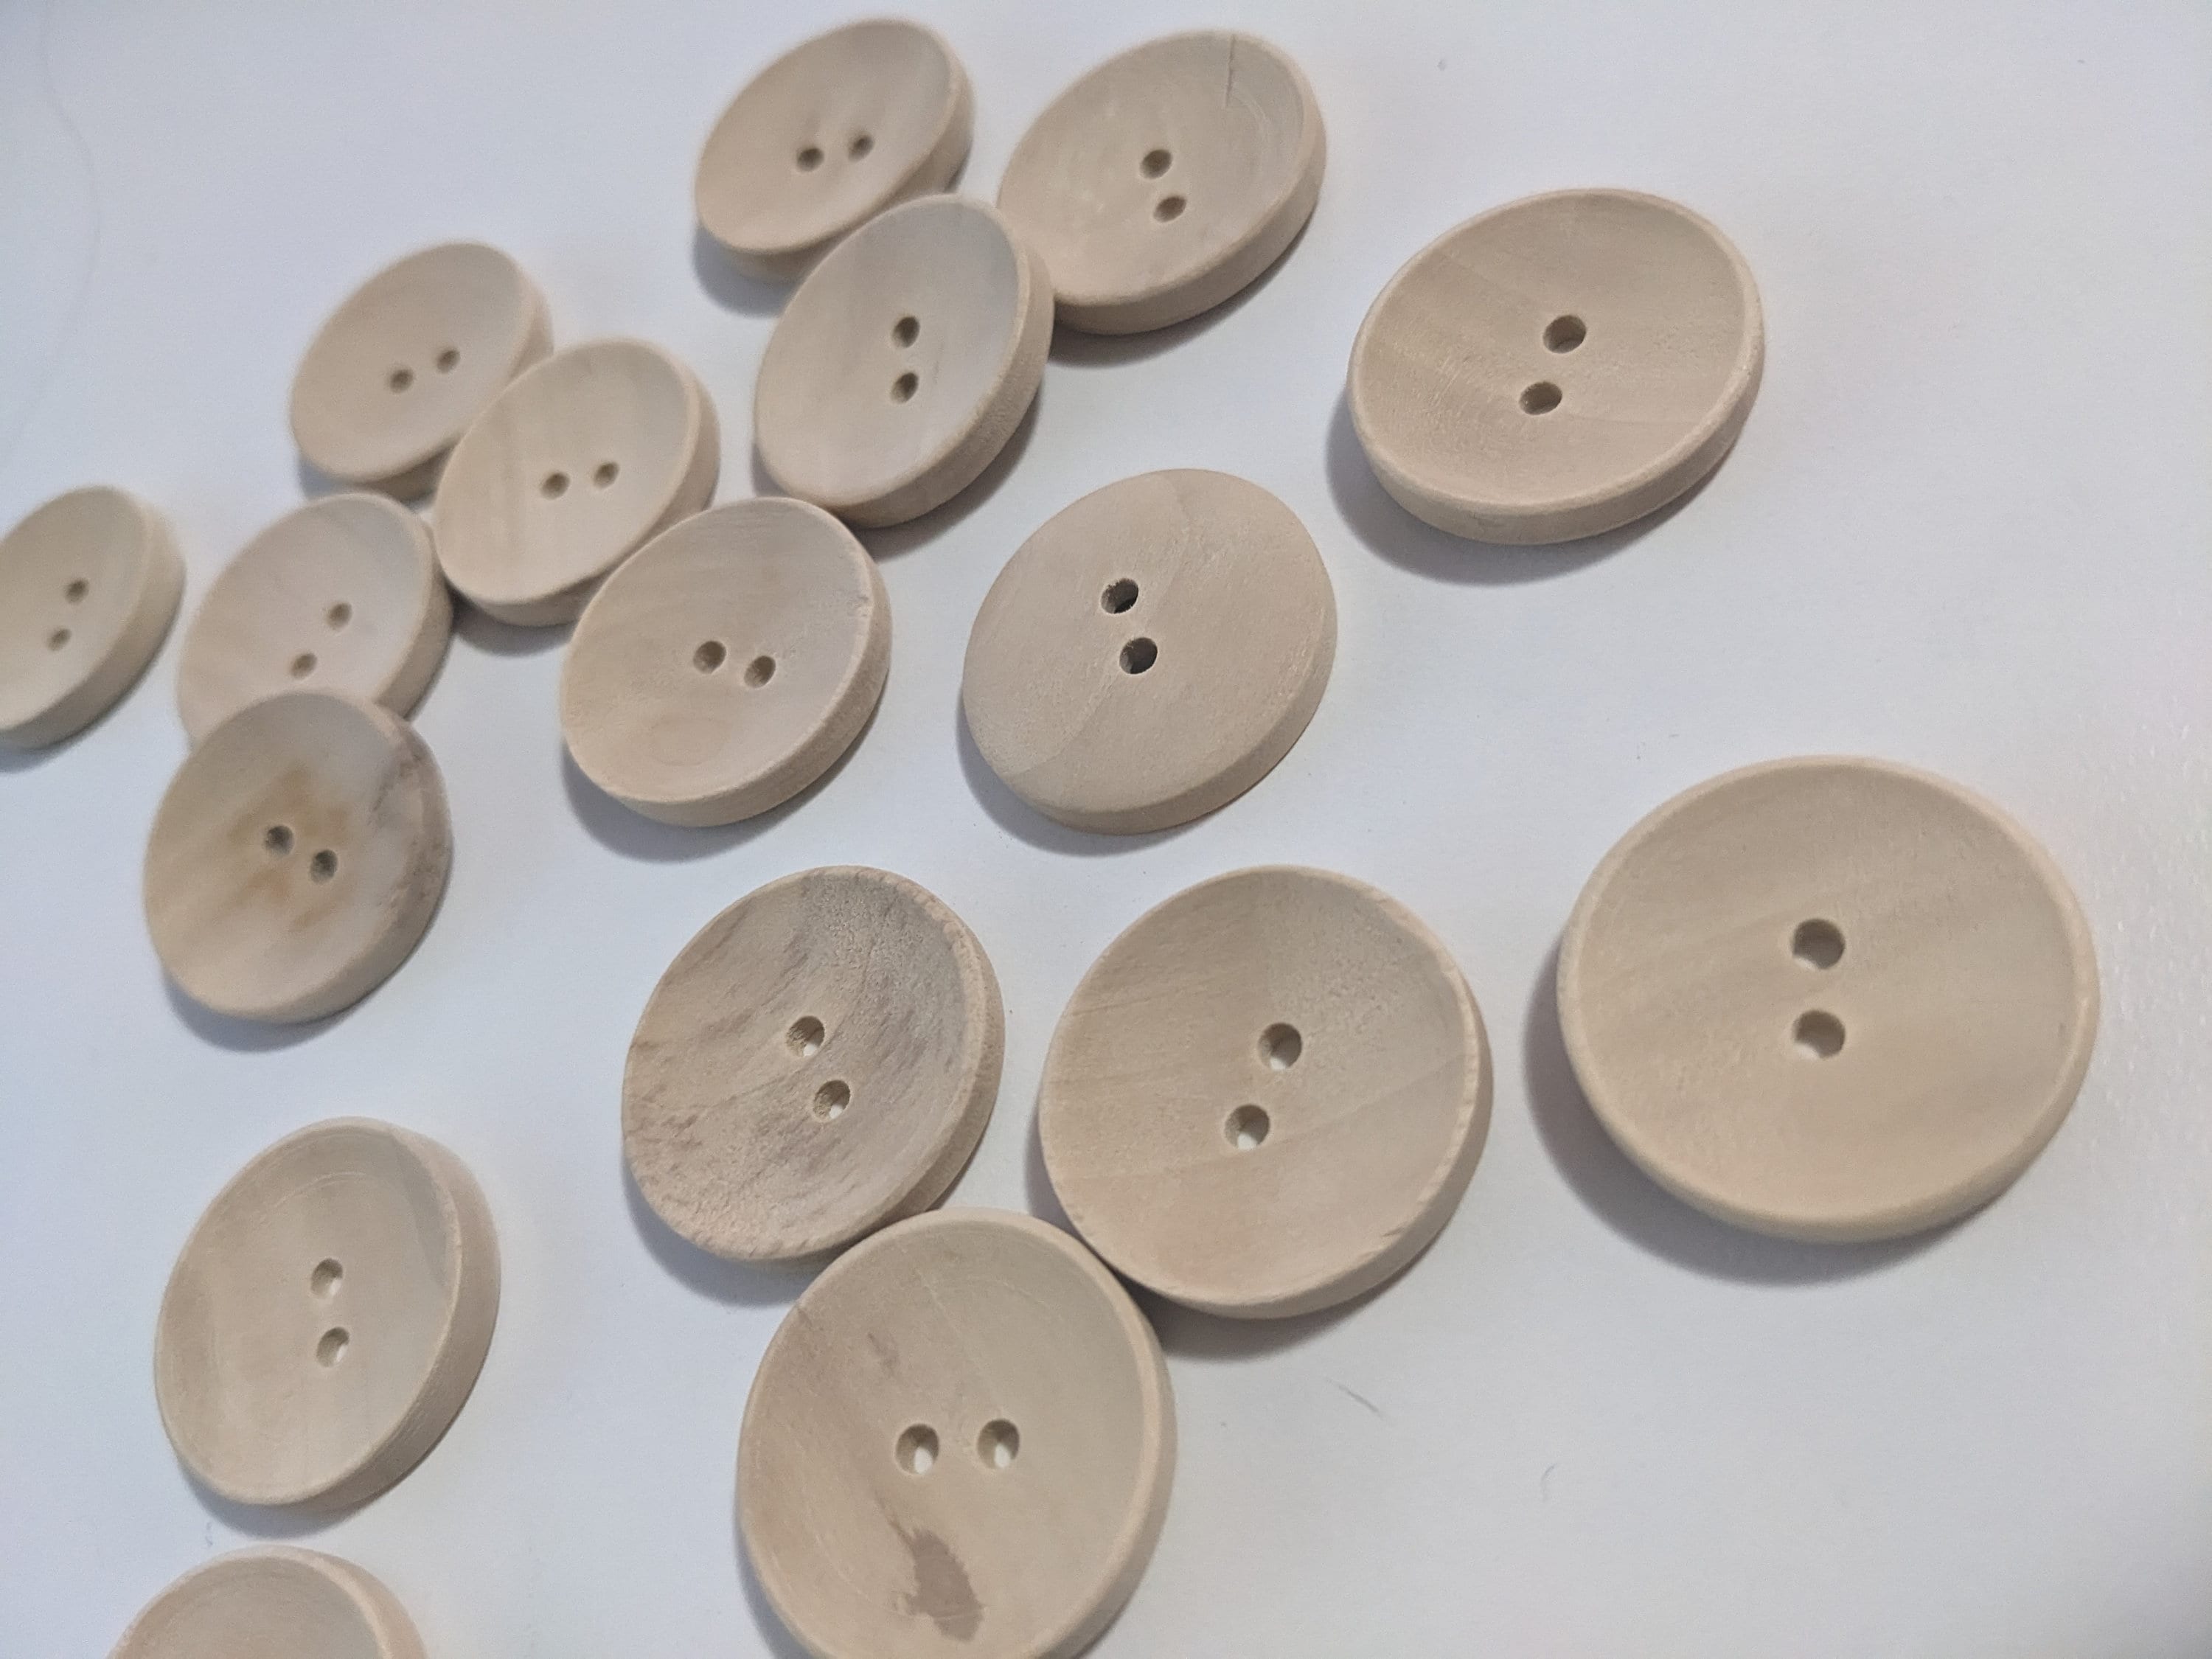 Crafters Wooden Buttons, Read Handmade With Love Buttons, 0.8 Inch